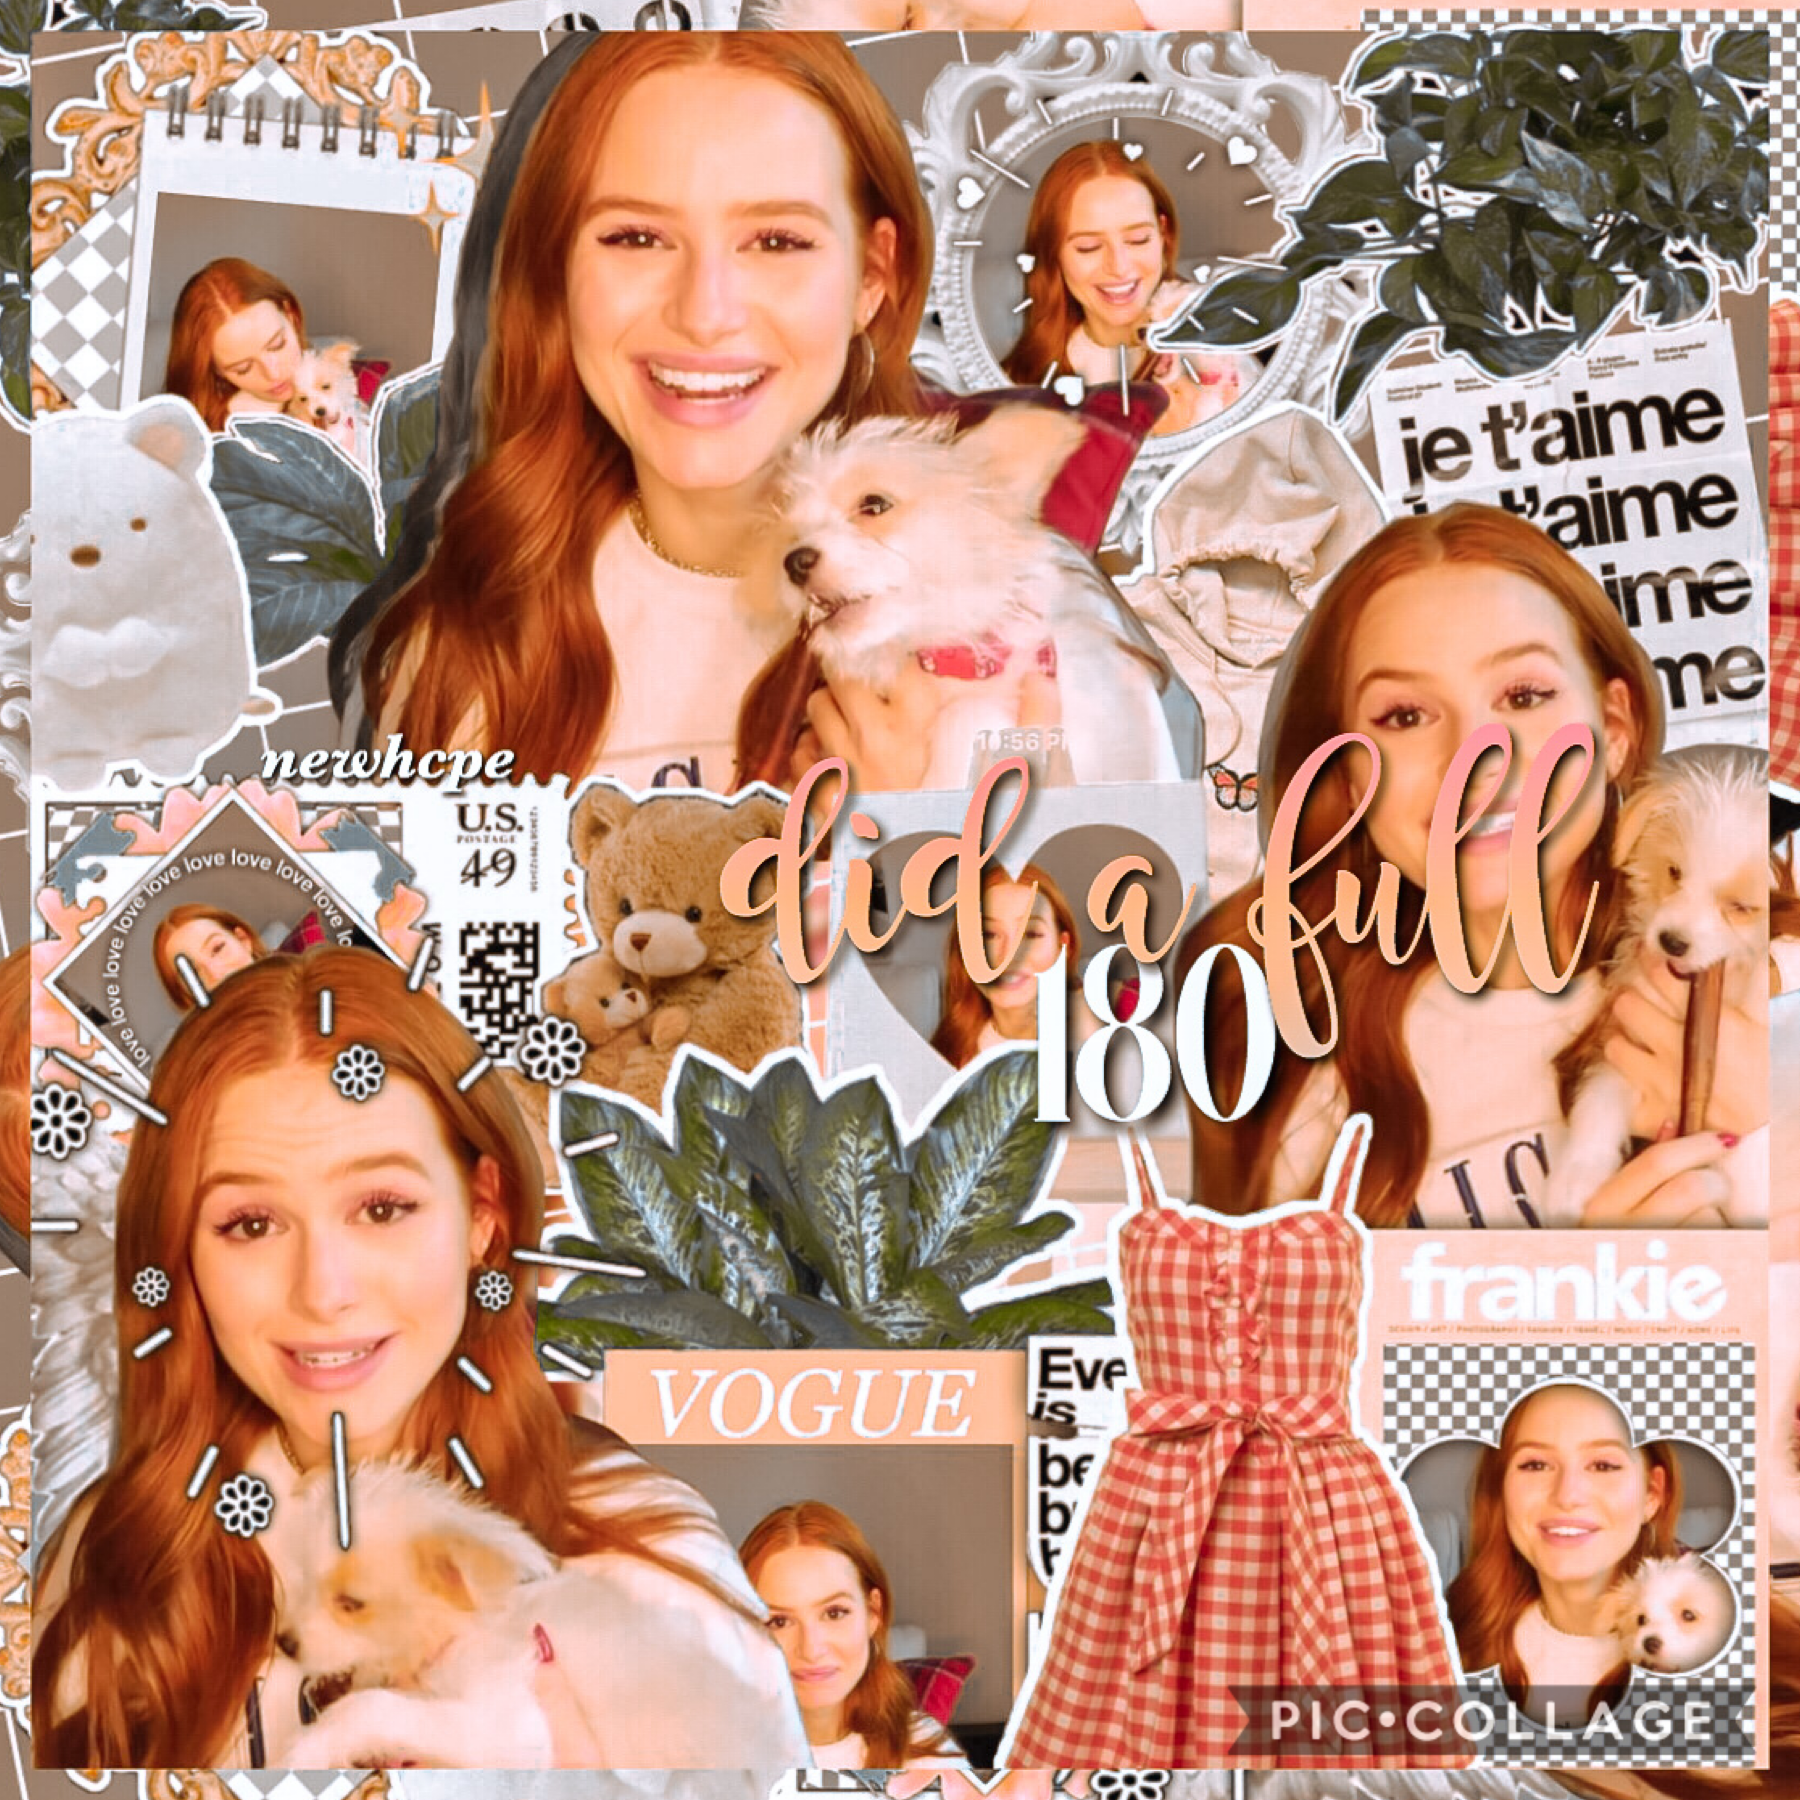 𝒄𝒍𝒊𝒄𝒌𝒆𝒓𝒐𝒐𝒏𝒊! 🎐

another edit, aha! here’s one of the beautiful girlie that is madelaine 🥺💗 comment also collab request below! stay healthy & happy 💡 -luv, ella